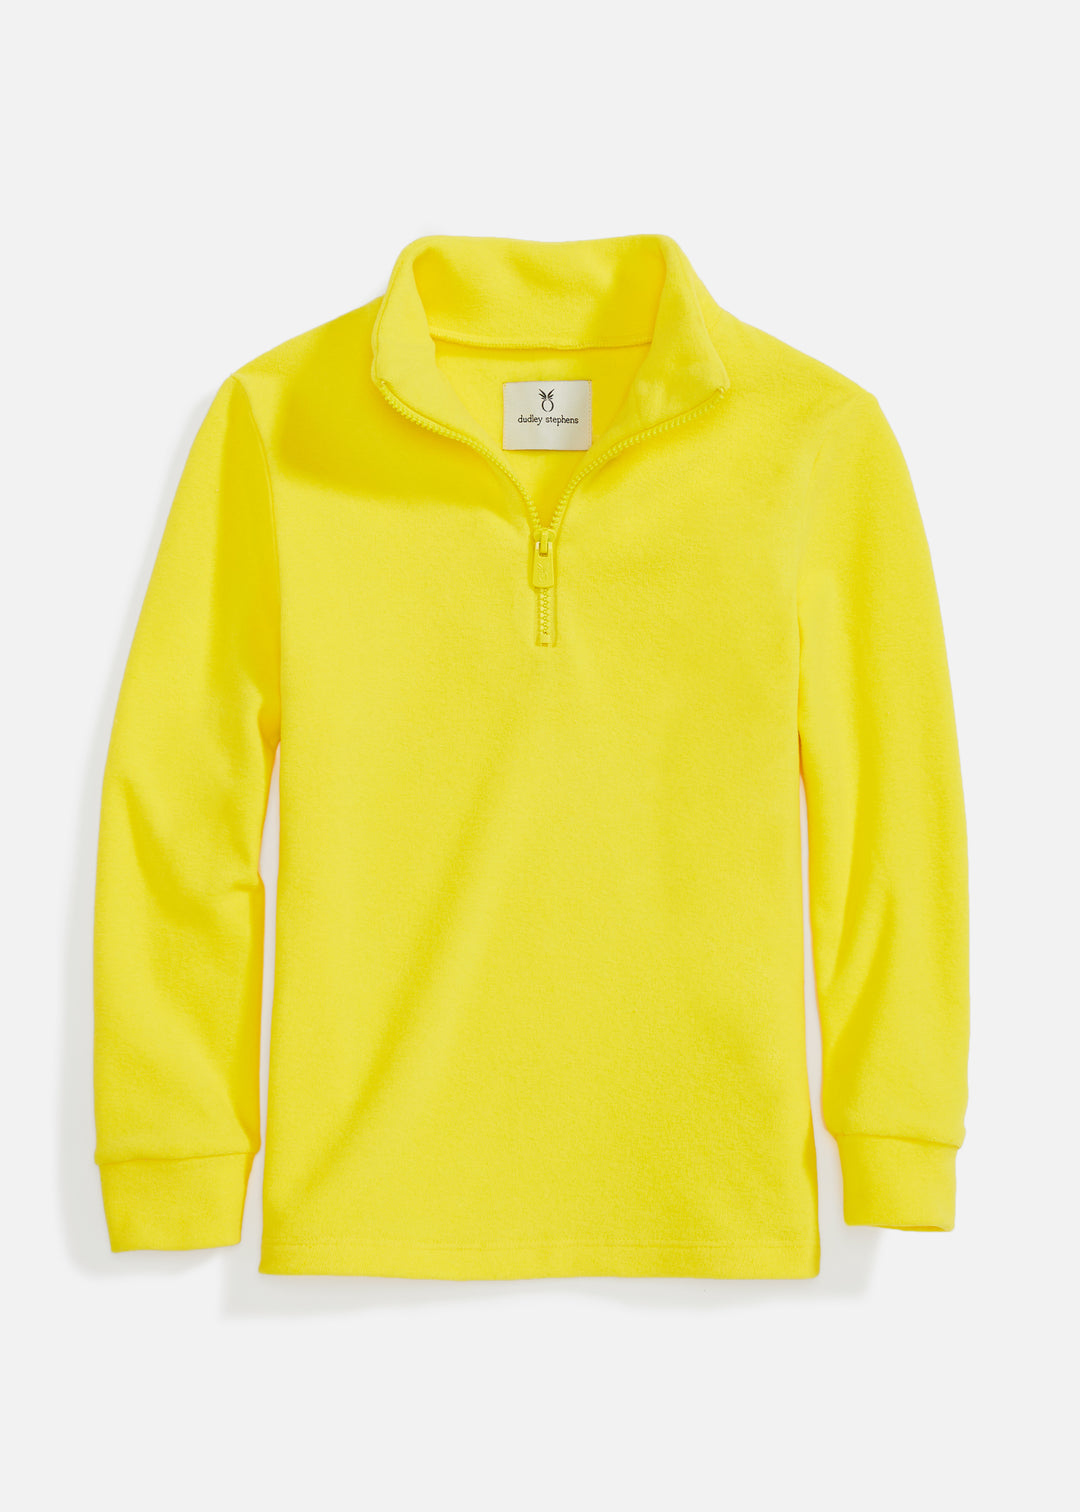 Kids Windabout Pullover in Terry Fleece (Sunshine)